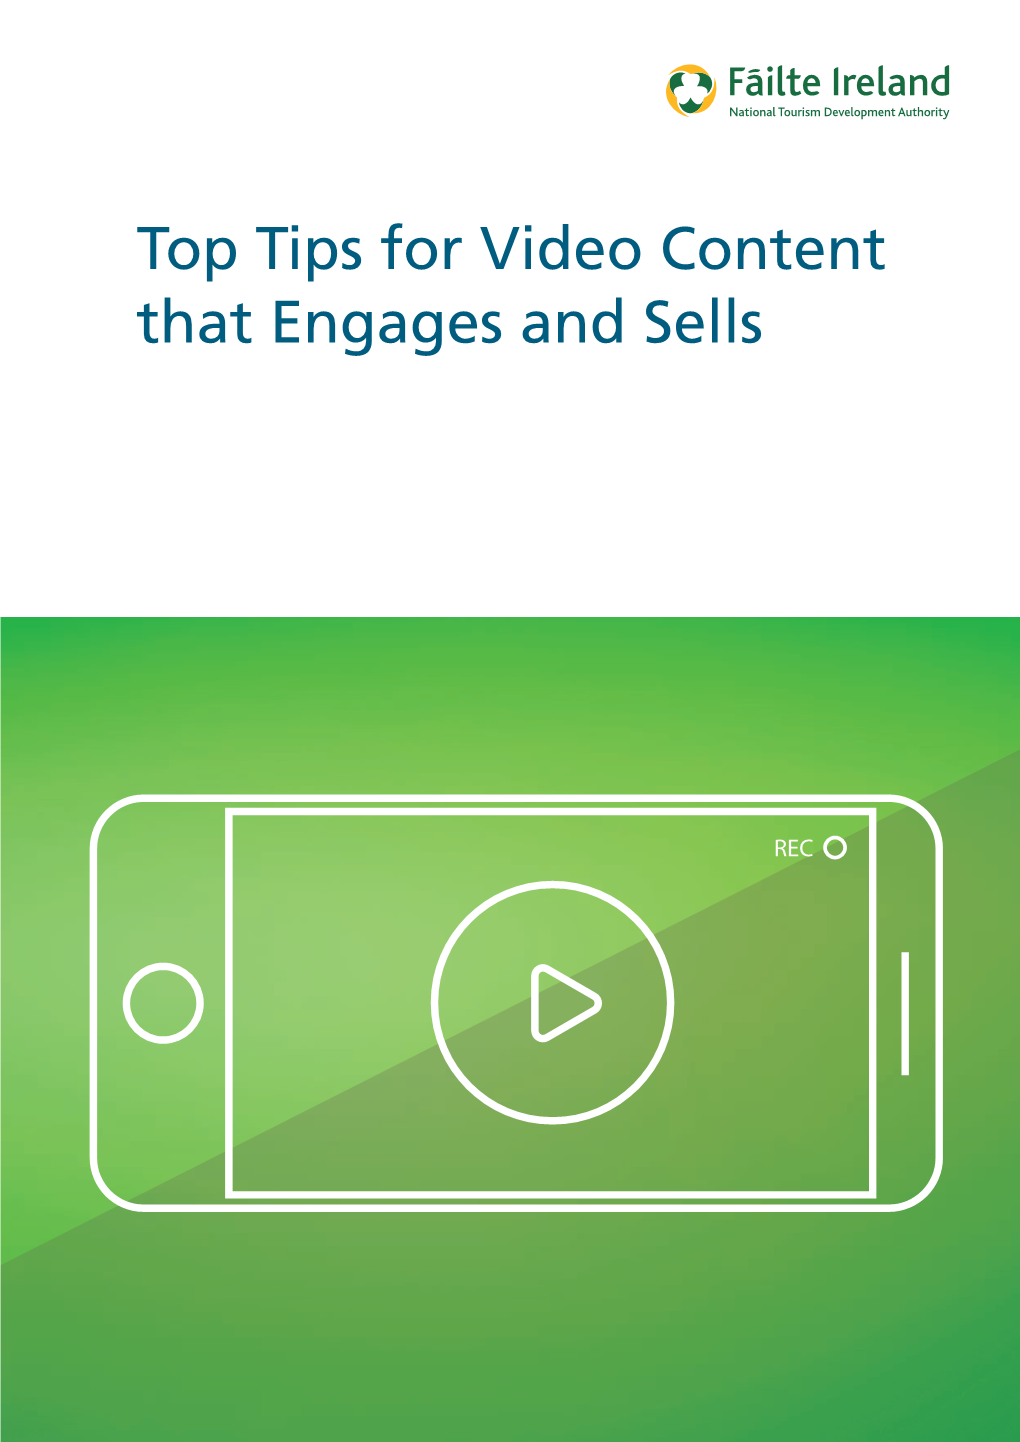 Top Tips for Video Content That Engages and Sells TOP TIPS for VIDEO THAT ENGAGES and SELLS